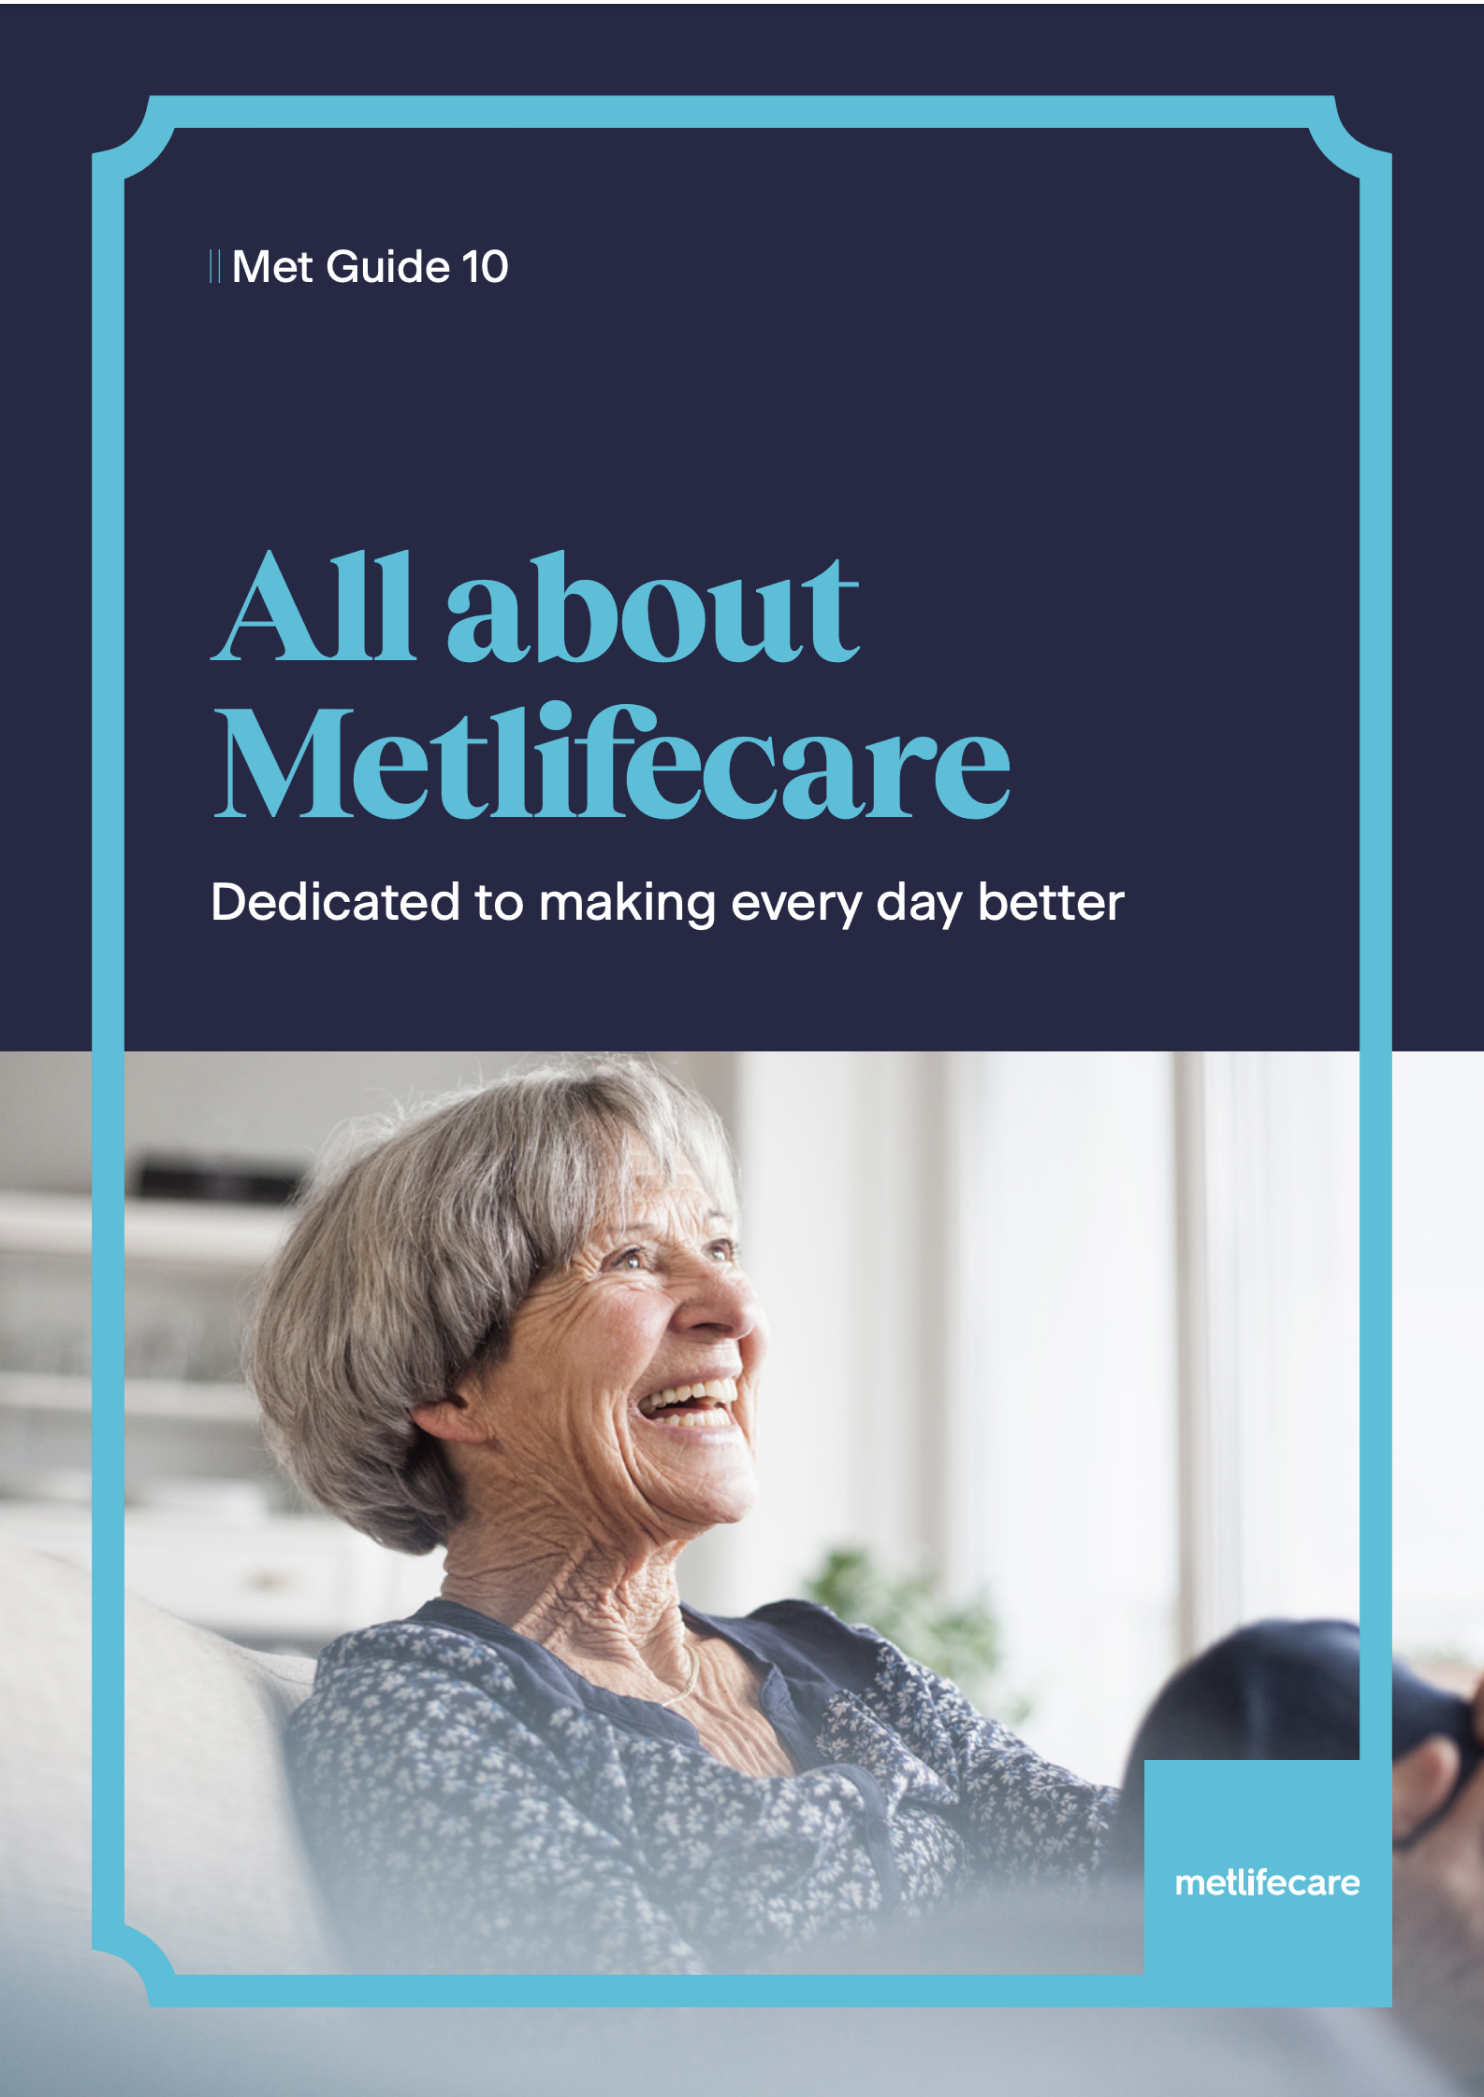 All about Metlifecare - General information pack